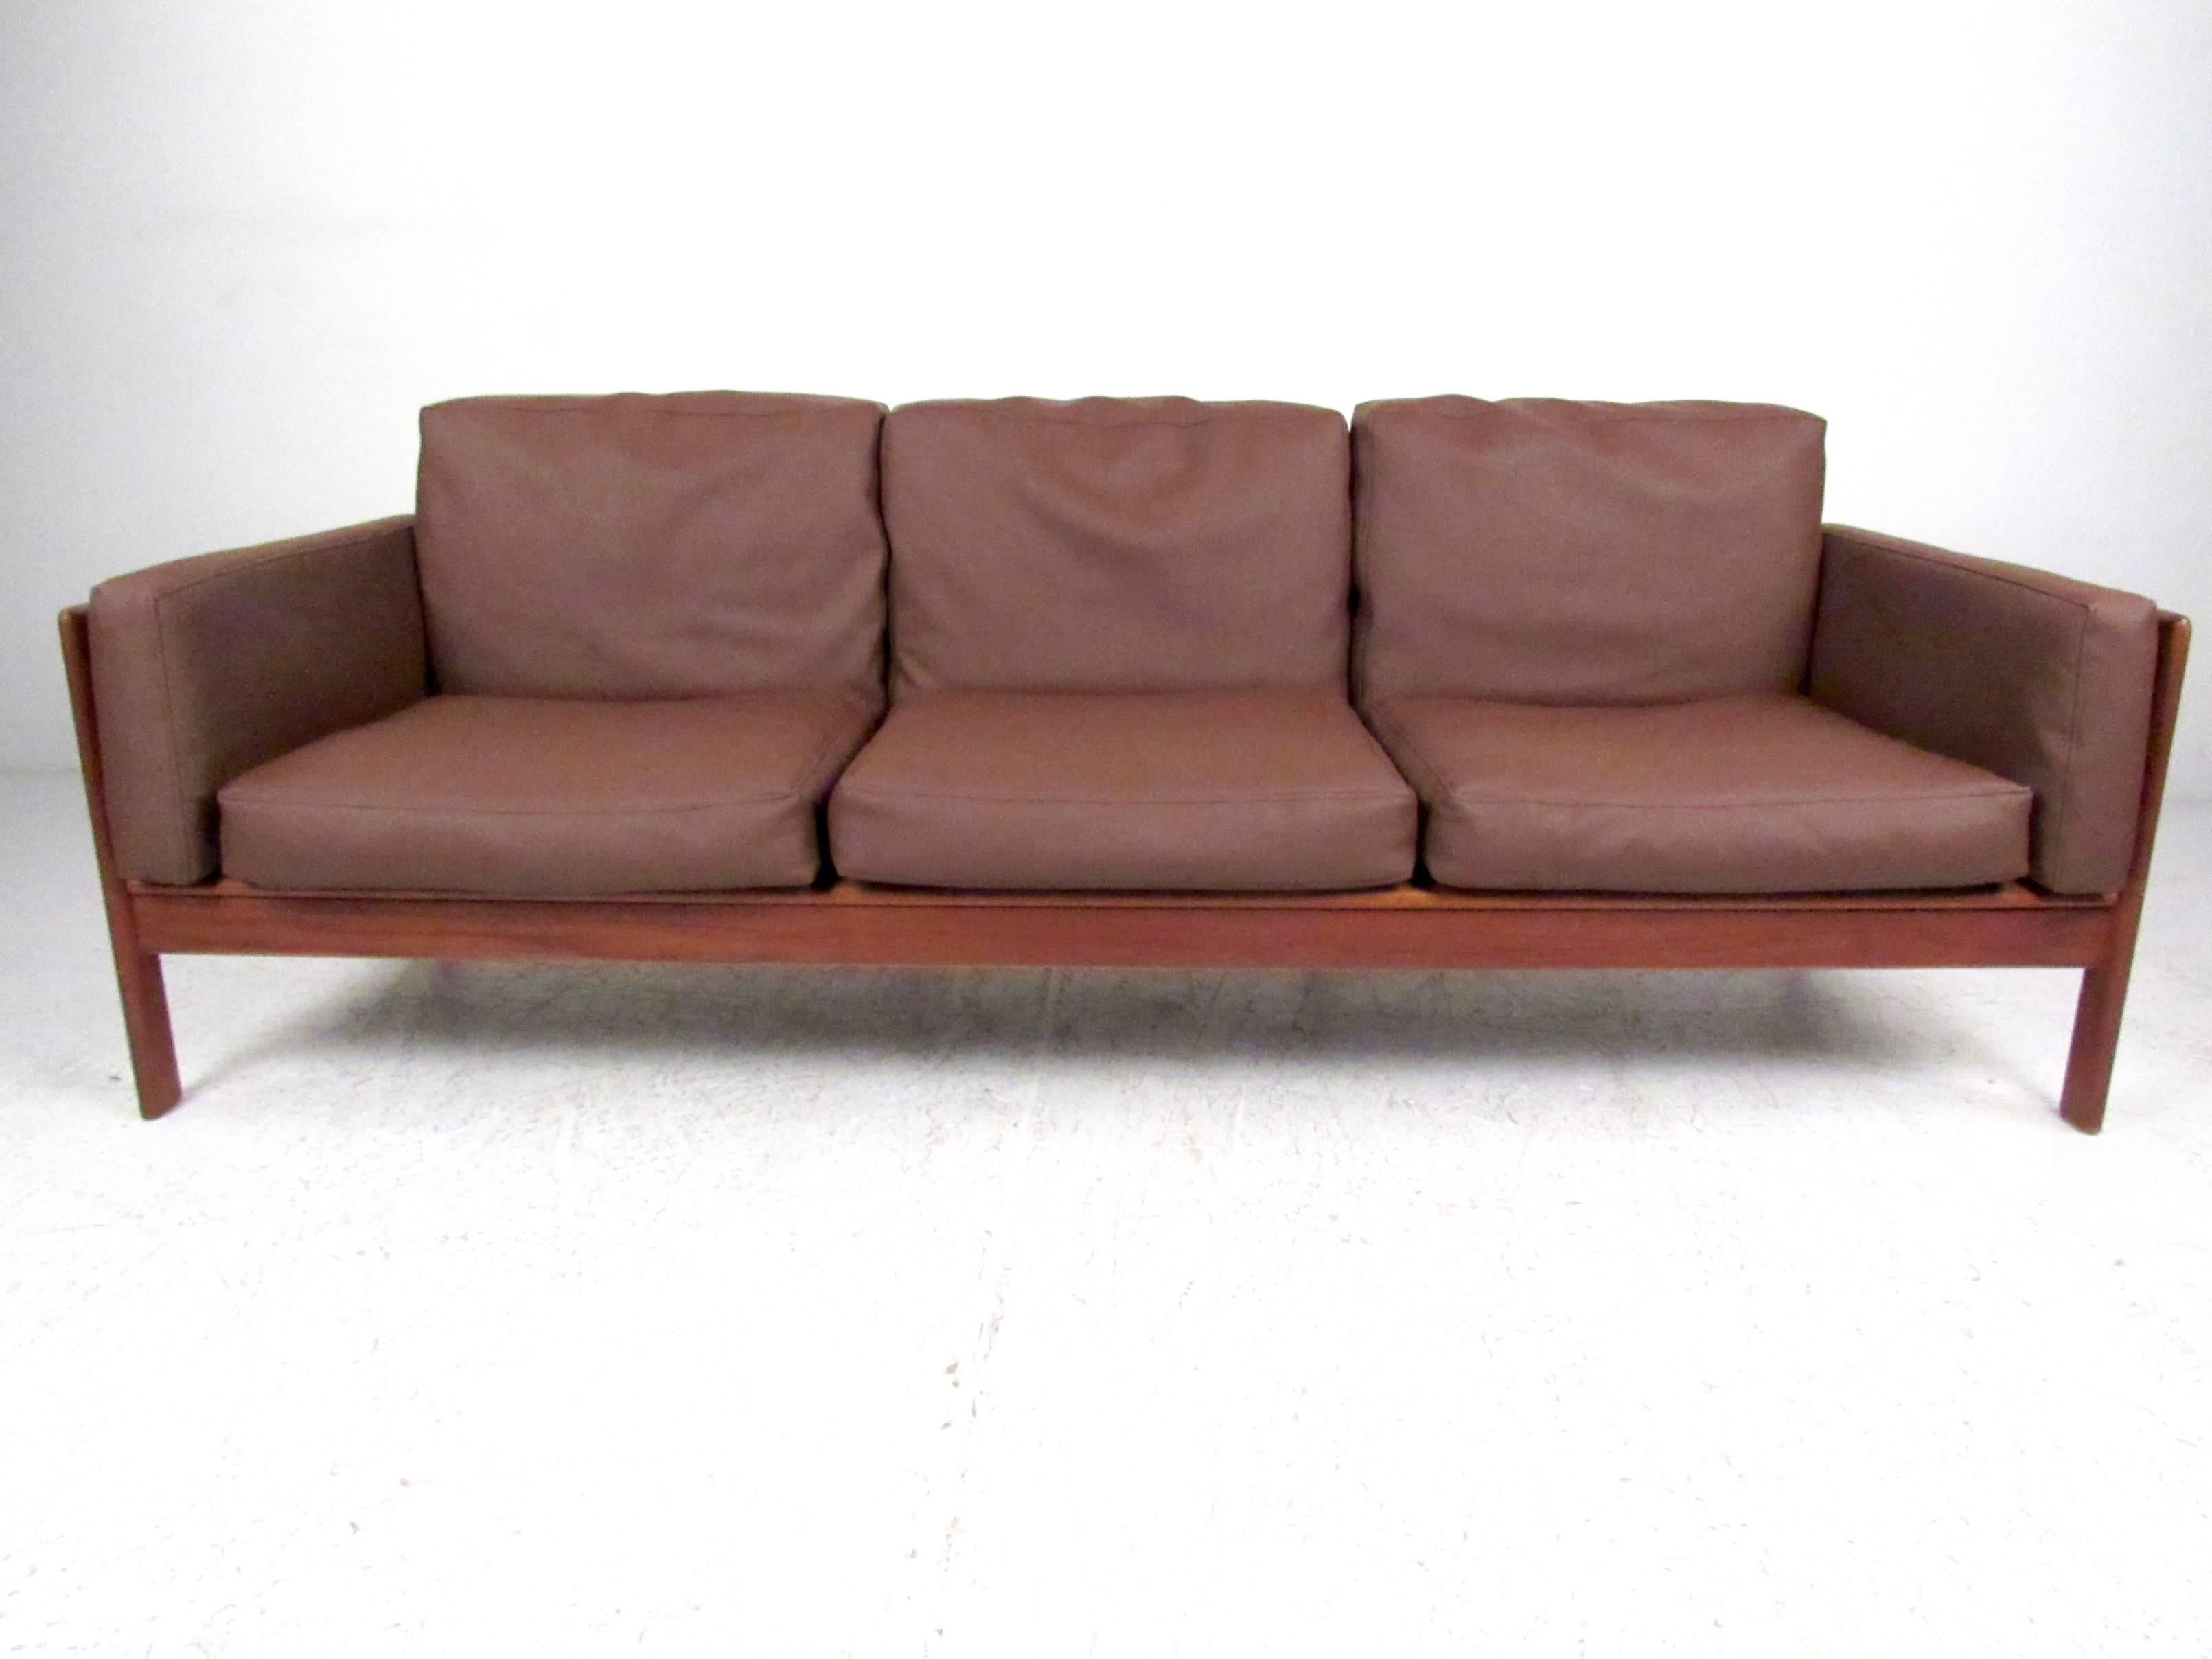 This stylish Mid-Century Modern sofa by Komfort offers seating for three and impressive solid teak frame. Made in Denmark, this beautiful sofa offers comfortable seating with clean, modern lines. Quality construction, please confirm item location